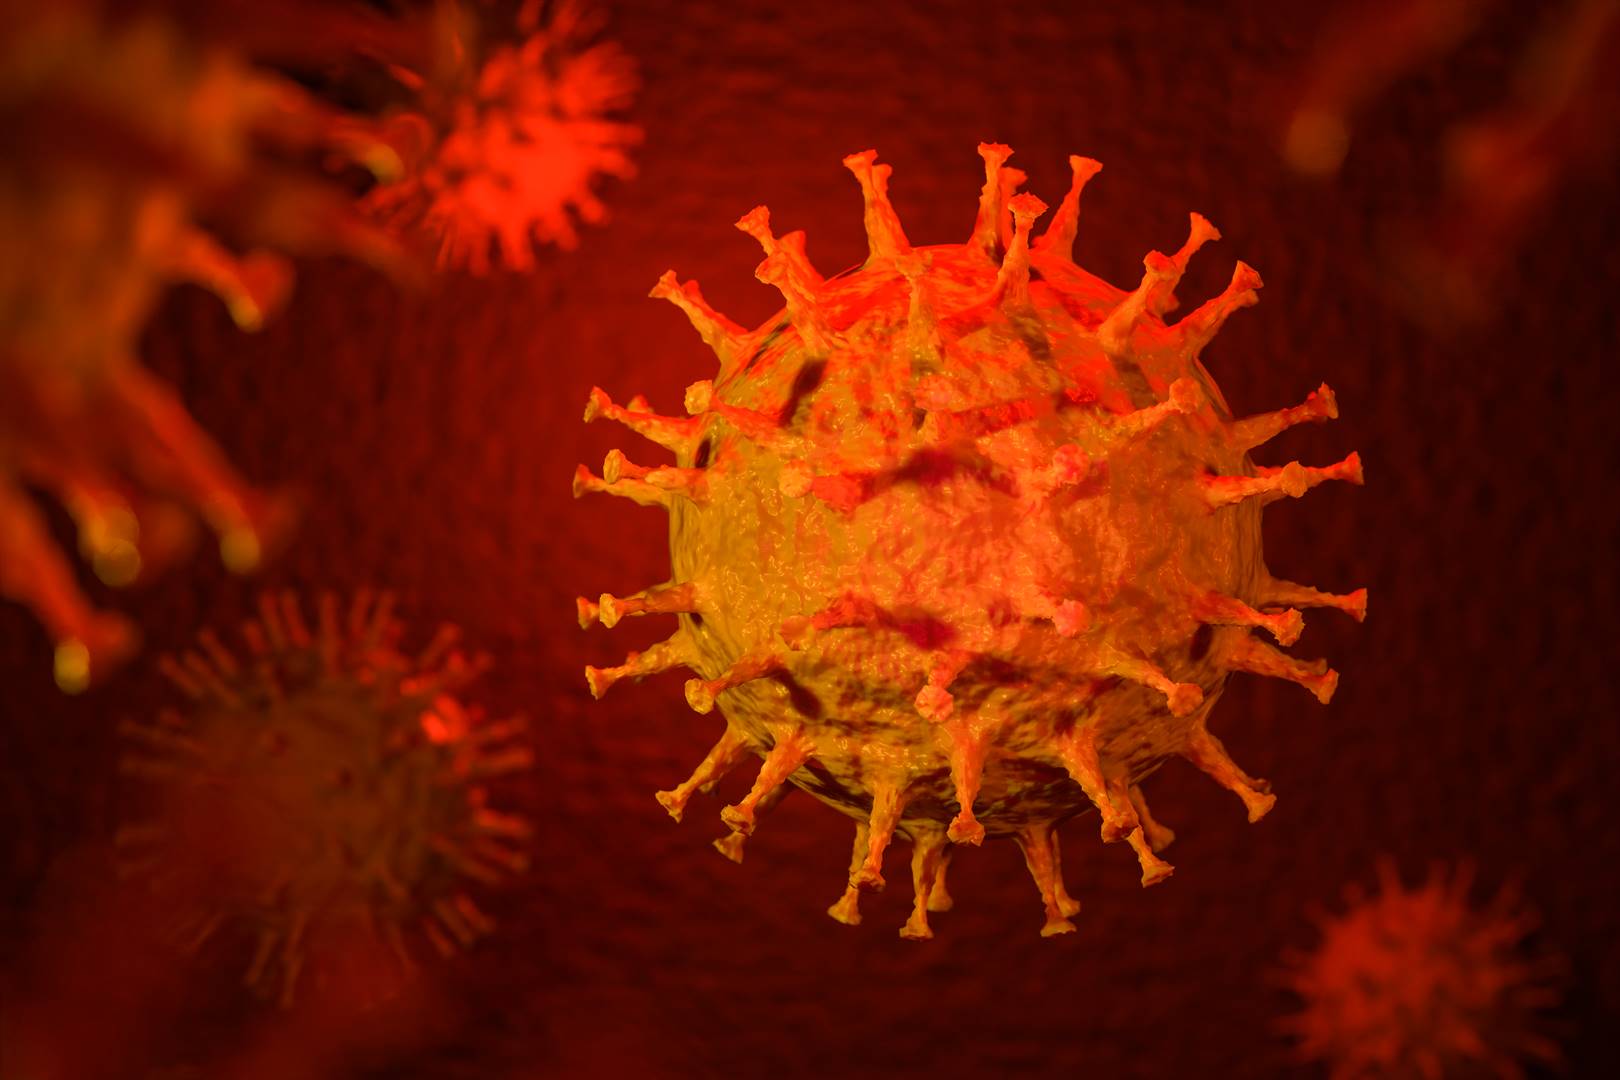 African countries are either adamant in their refusal to account for Covid-19 infections or are unable to owing to debilitated health systems. Picture: iStock